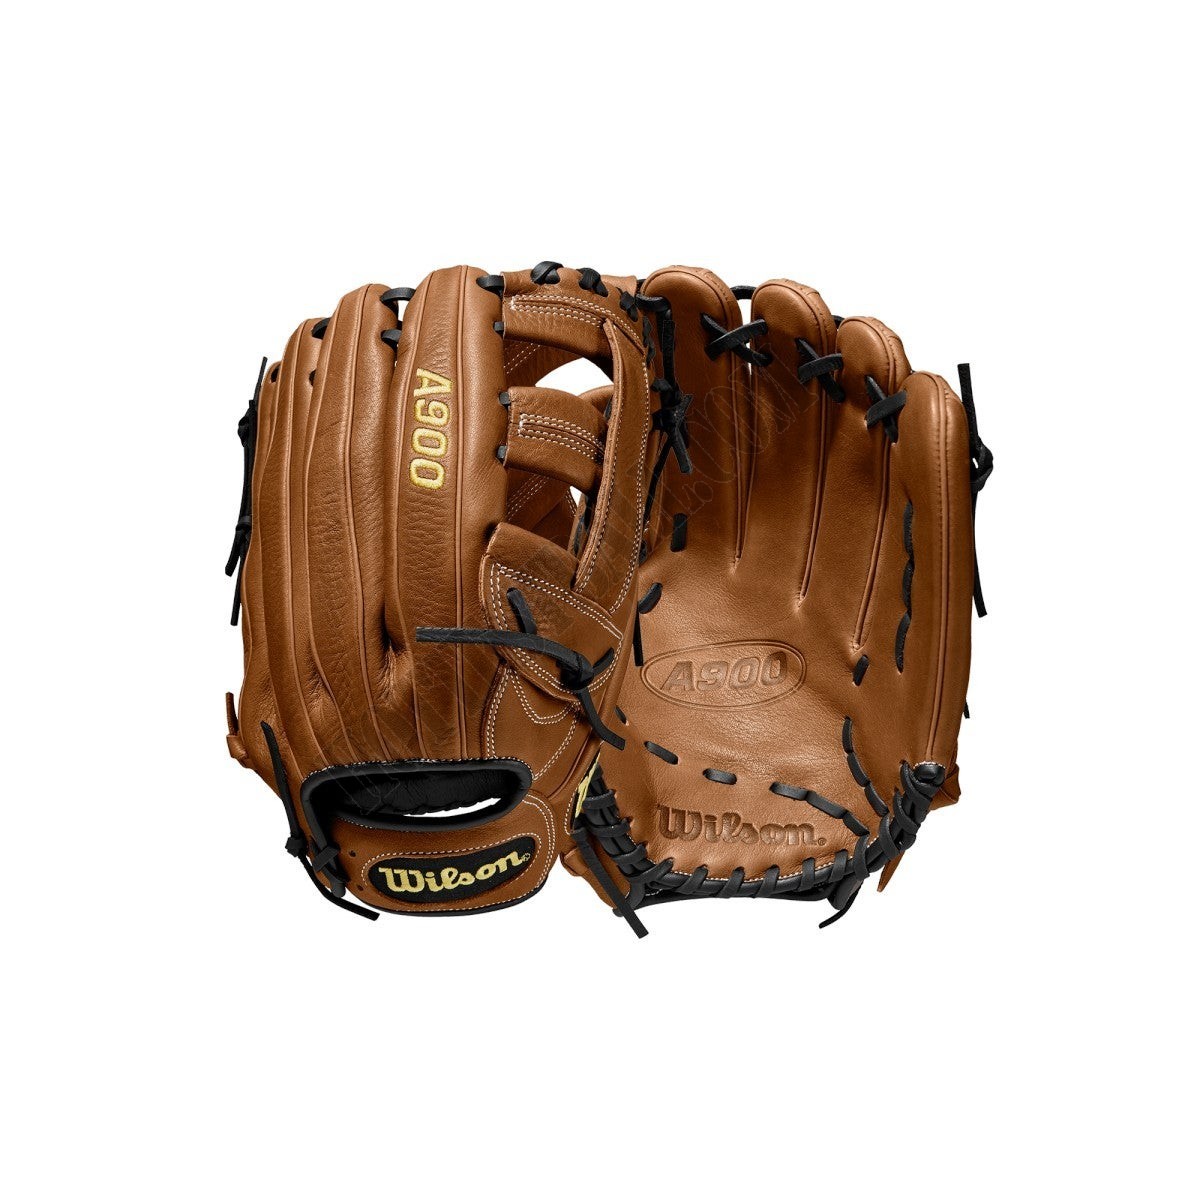 2020 A900 13" Slowpitch Glove ● Wilson Promotions - -0